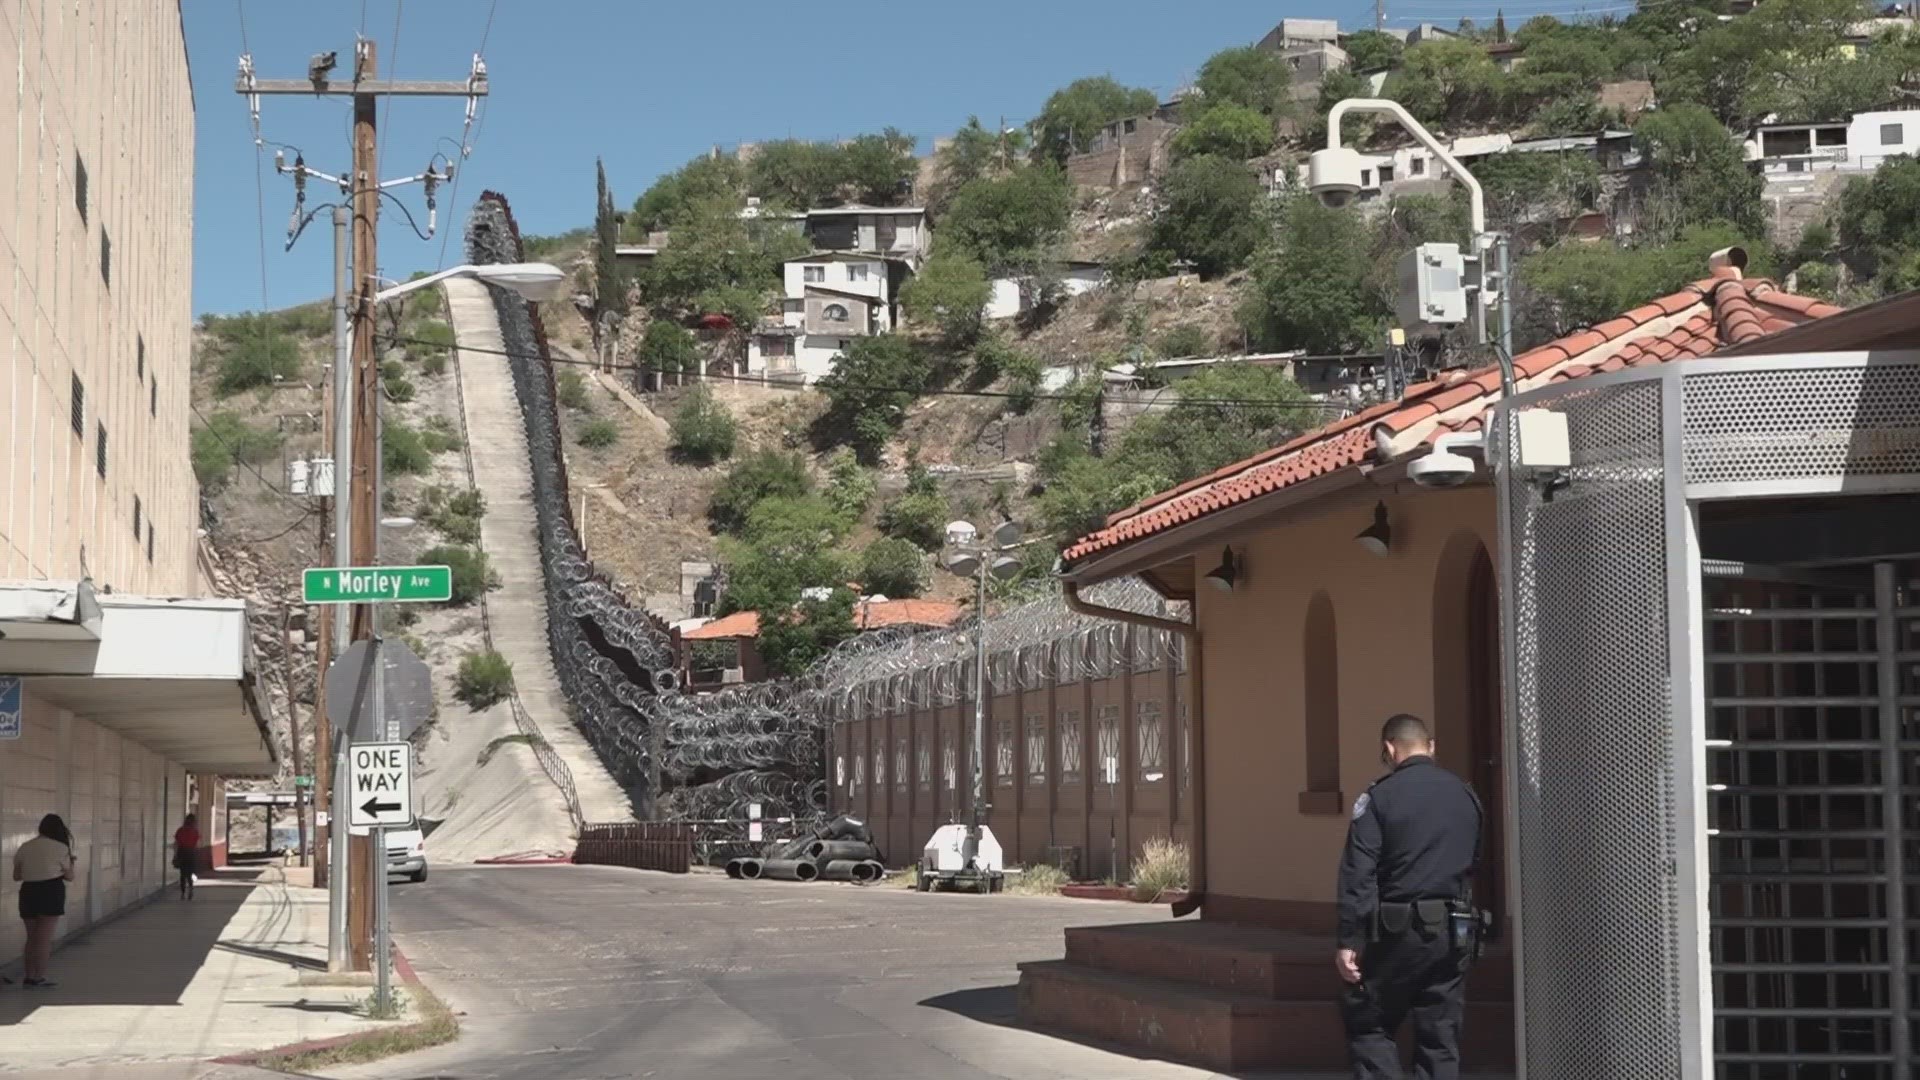 How is the community in Nogales preparing for the end of Title 42? Allison Rodríguez takes a look at the environment in the Arizona border town.